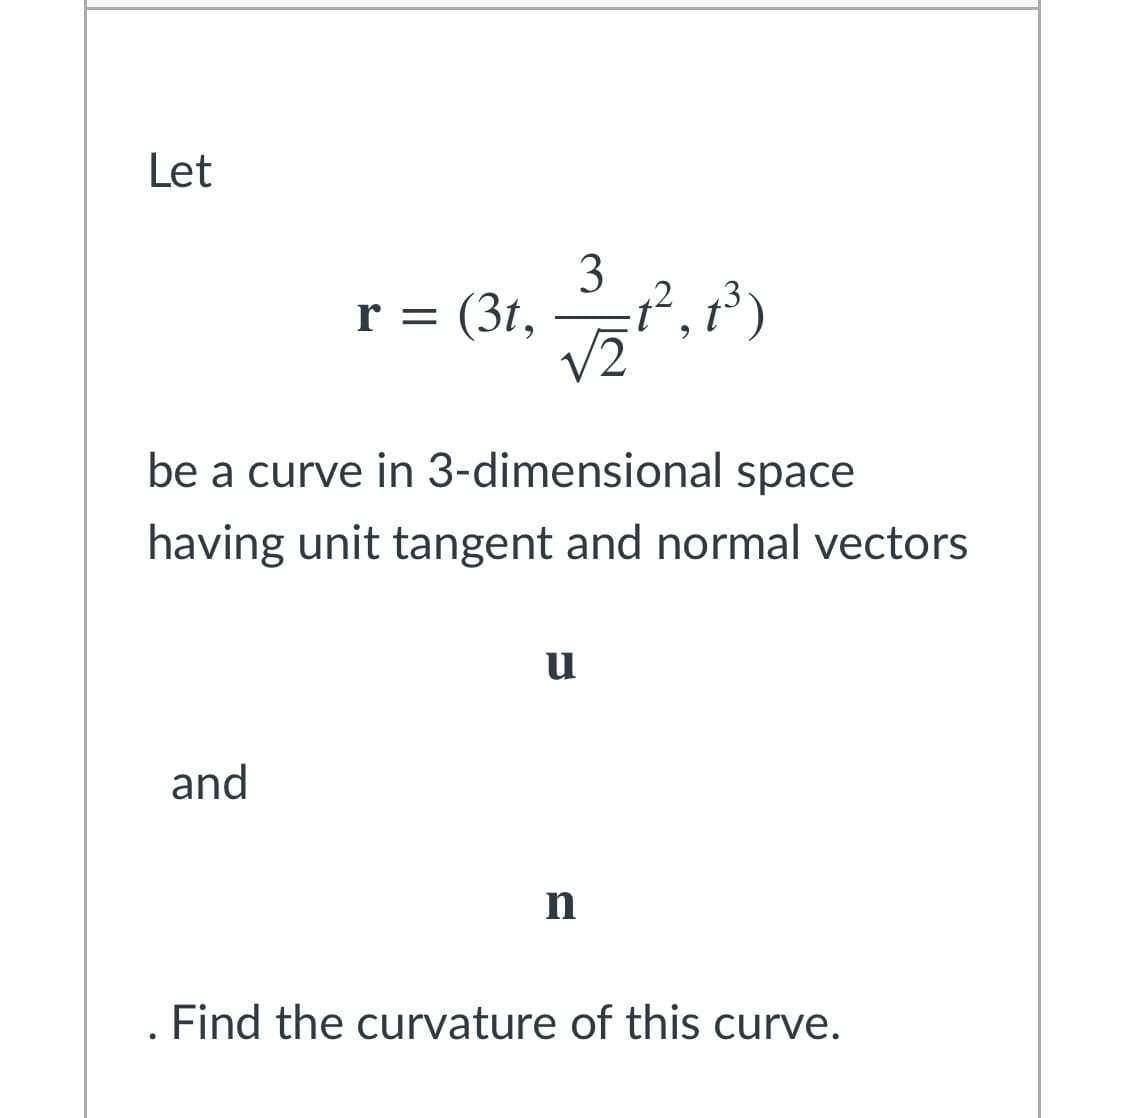 Let
3
.2
= (3t,
r =
V2
be a curve in 3-dimensional space
having unit tangent and normal vectors
u
and
. Find the curvature of this curve.
